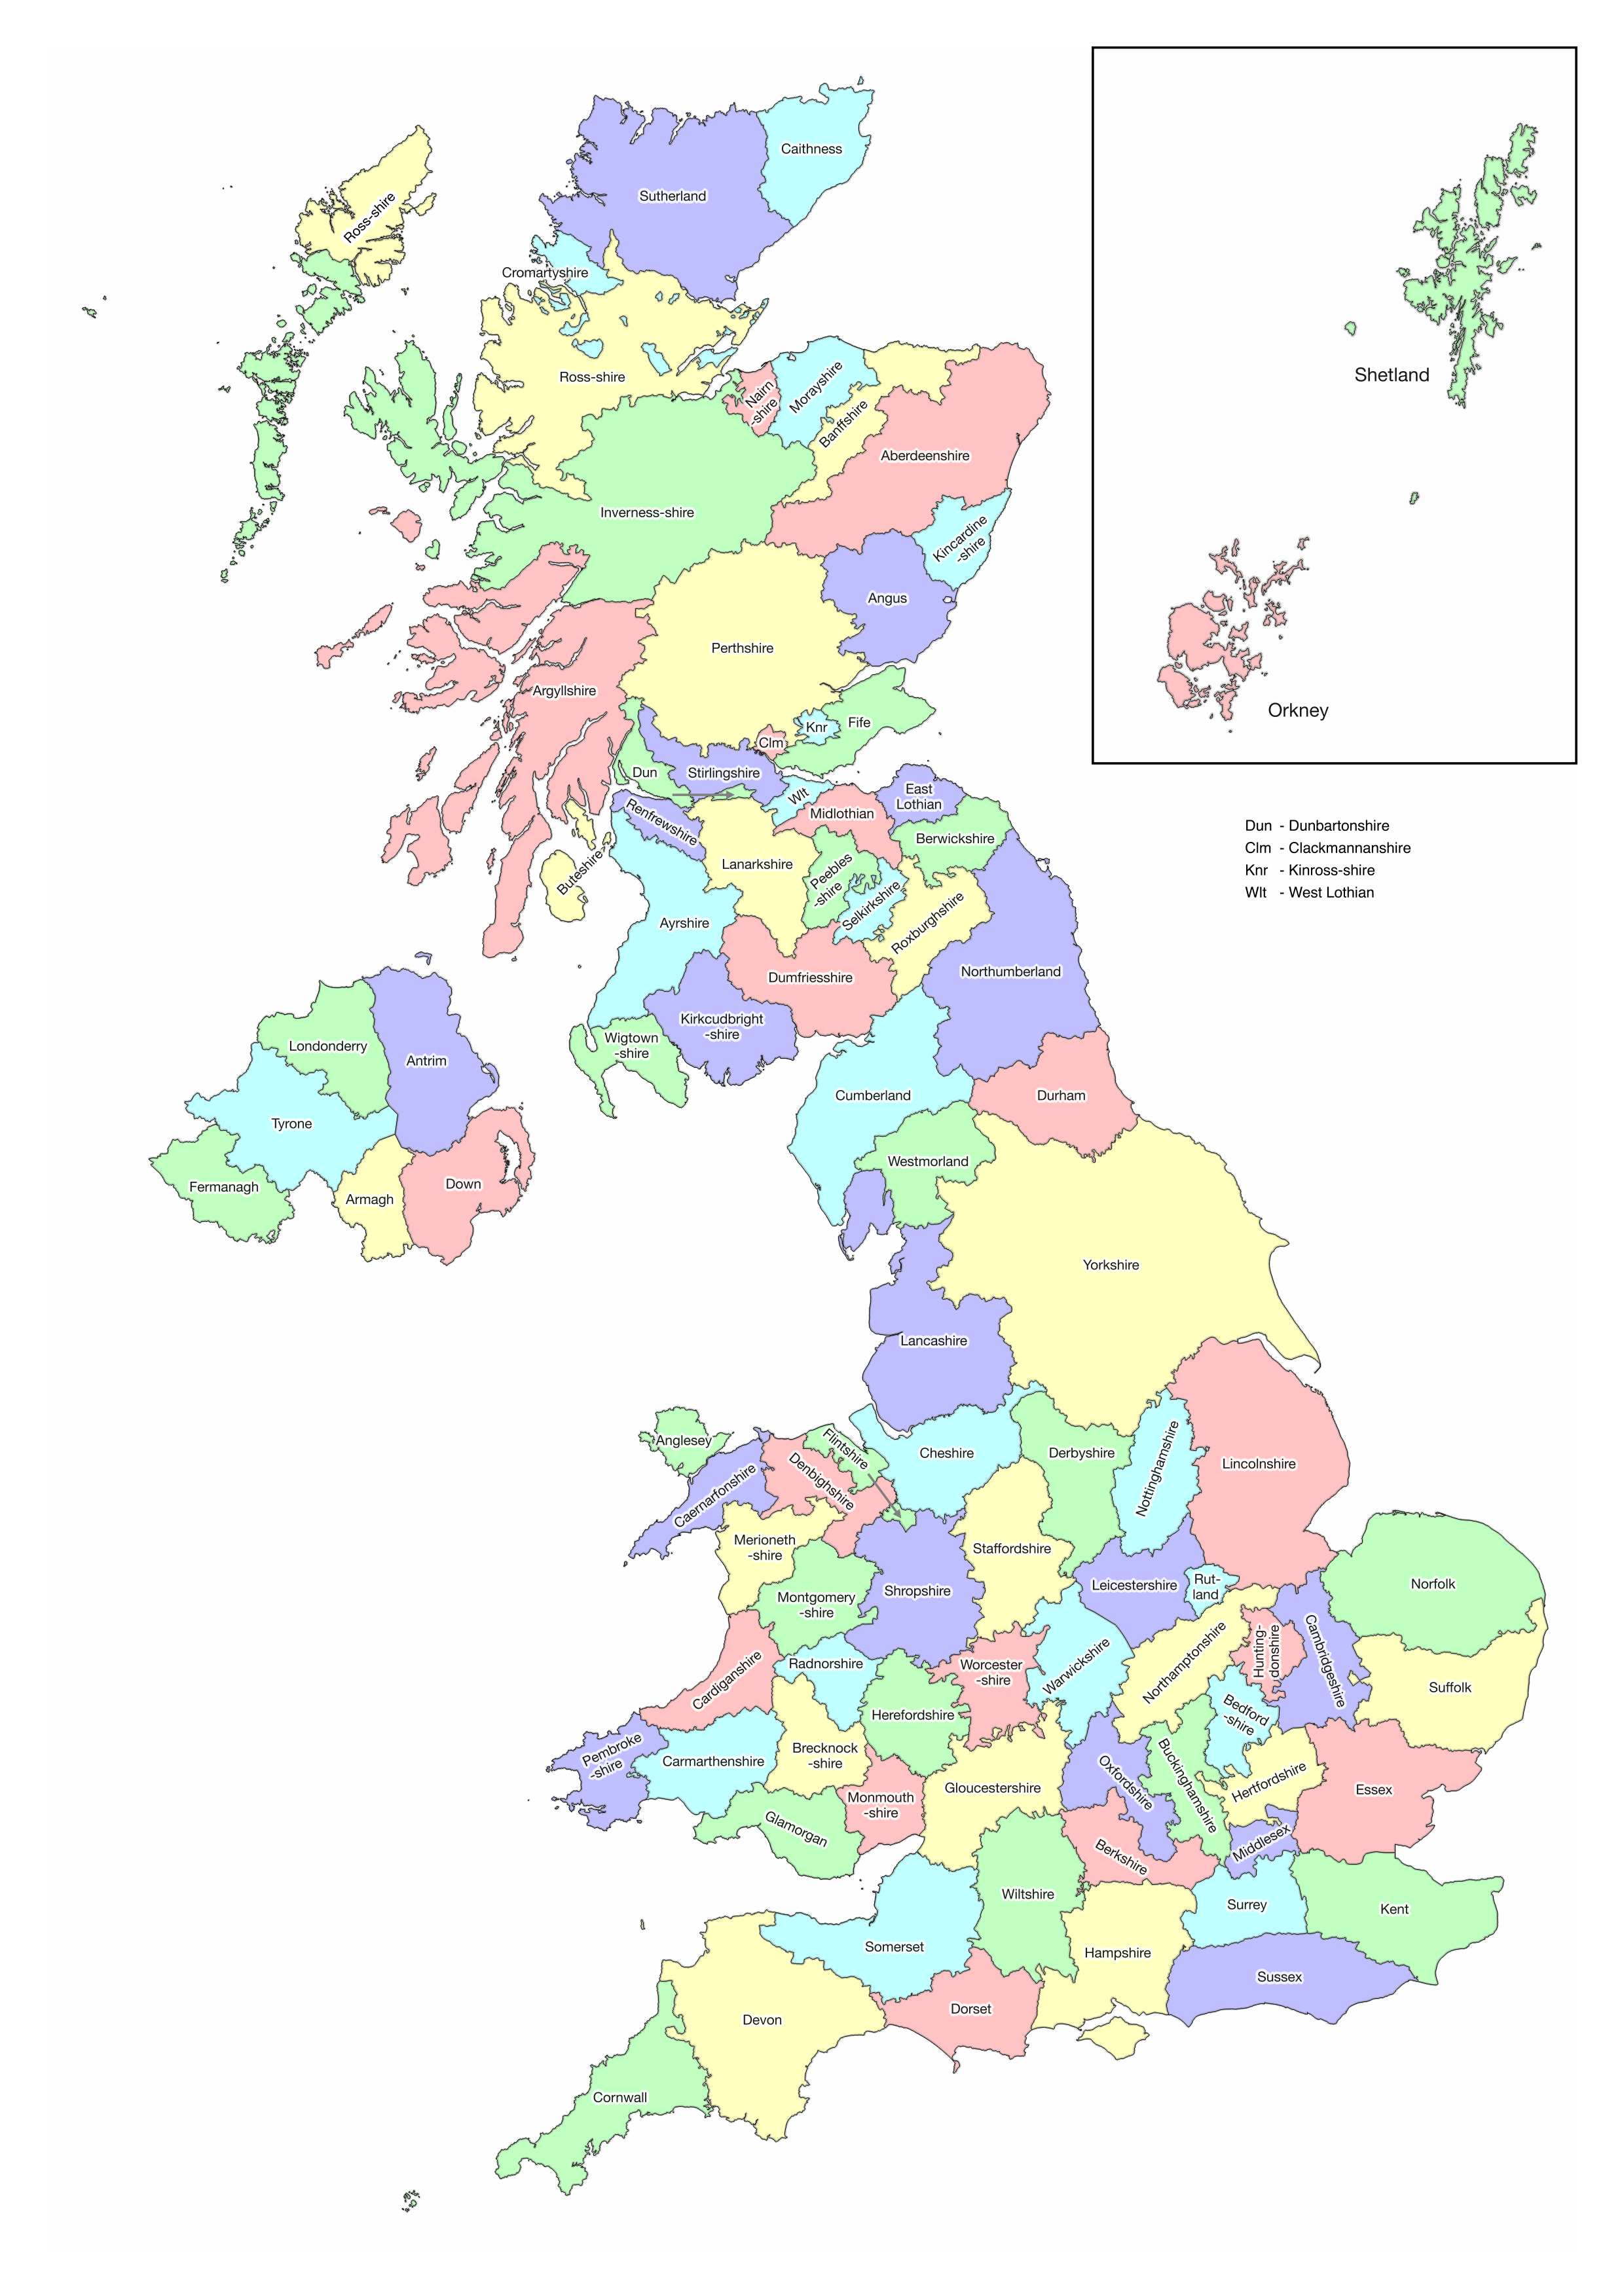 The historic counties of the United Kingdom